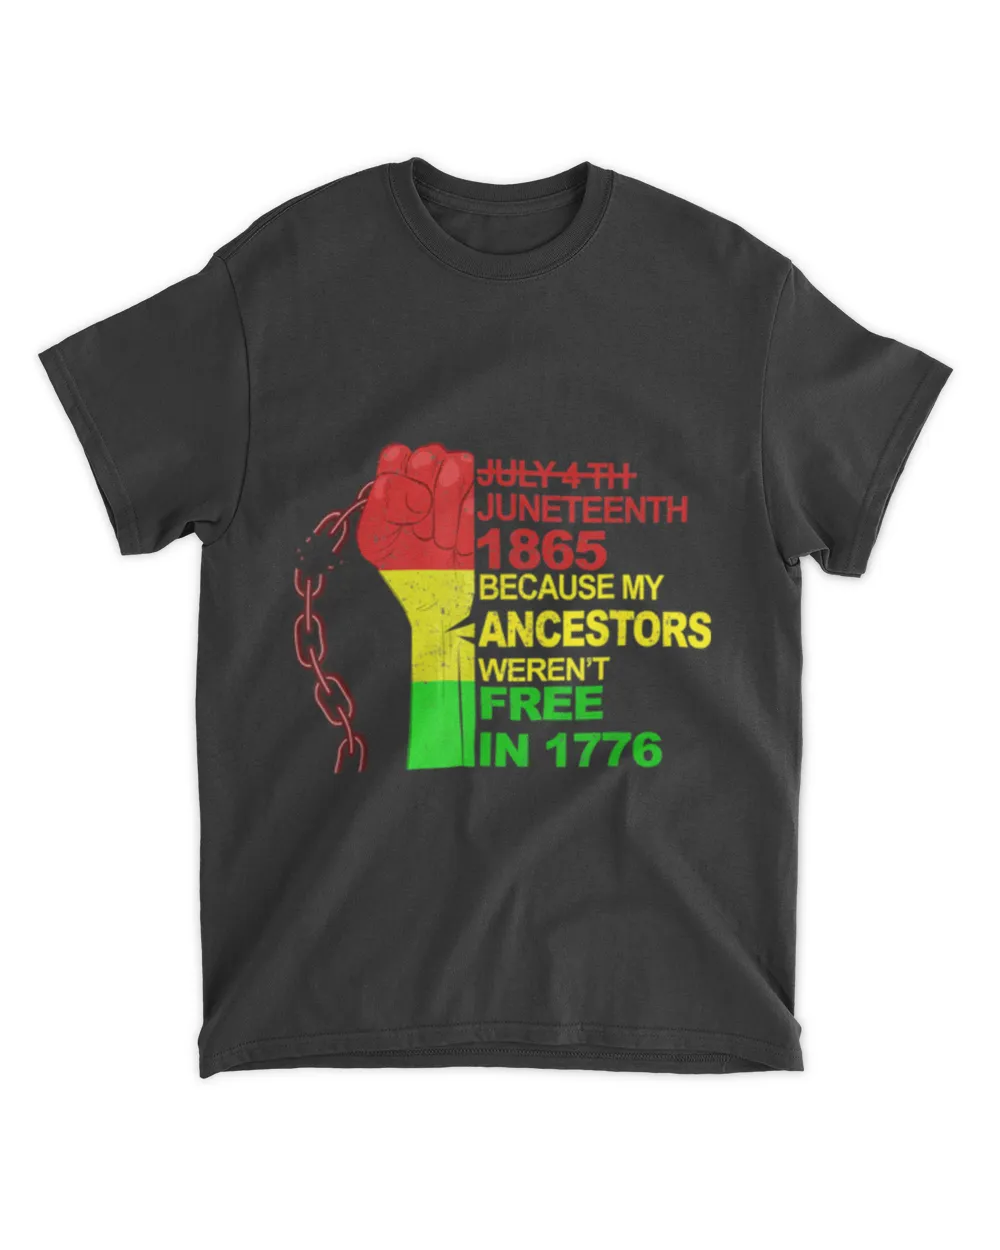 July 4th Juneteenth 1865 Celebrate African Americans Freedom  Shirts tee